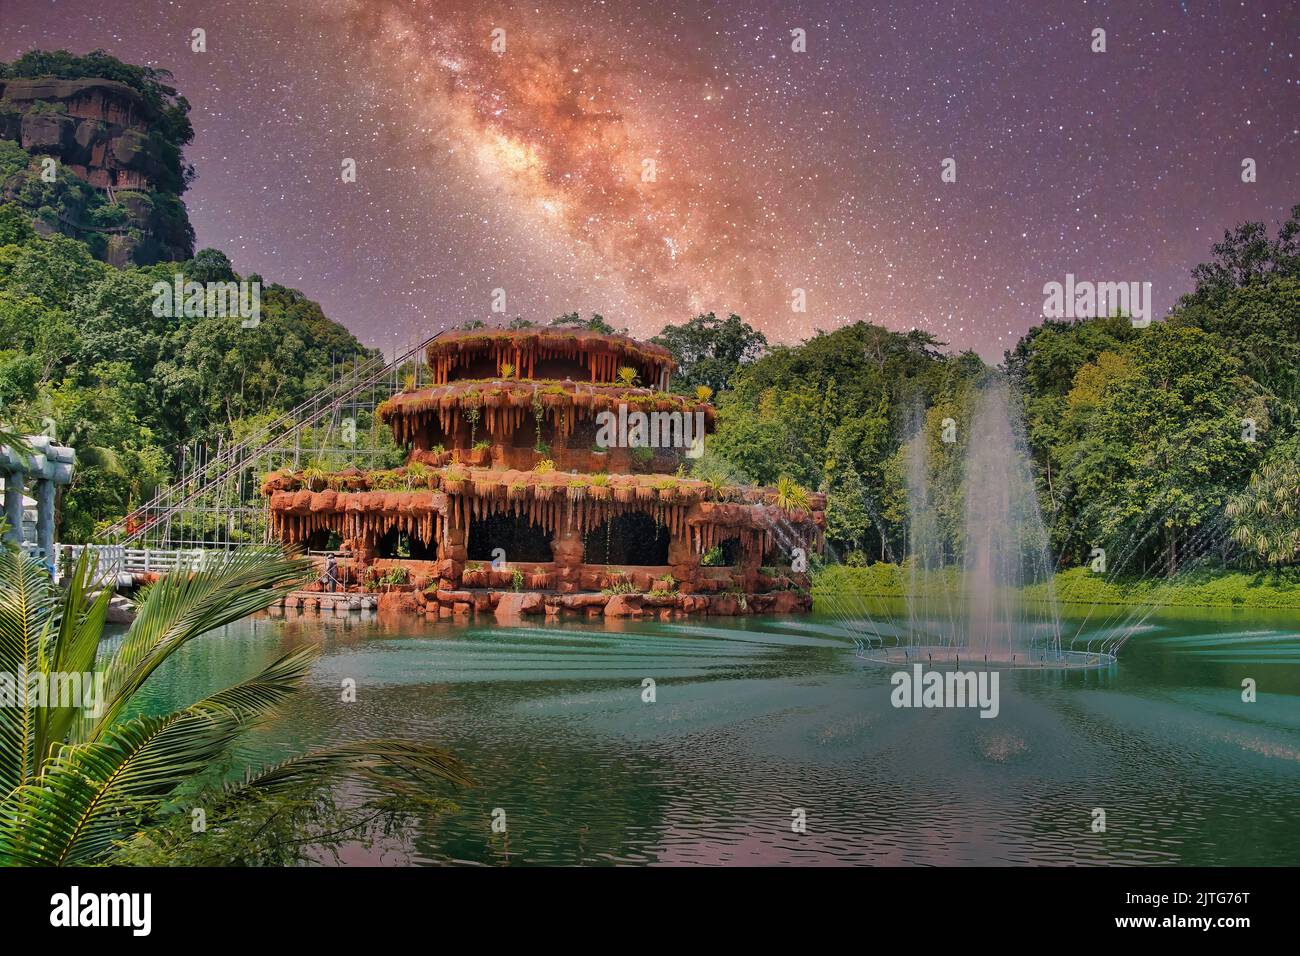 Fantasy landscape with a surreal, dripstone cave-like building in a lake with a fountain, surrounded by trees and a towering rock, under a starry sky. Stock Photo